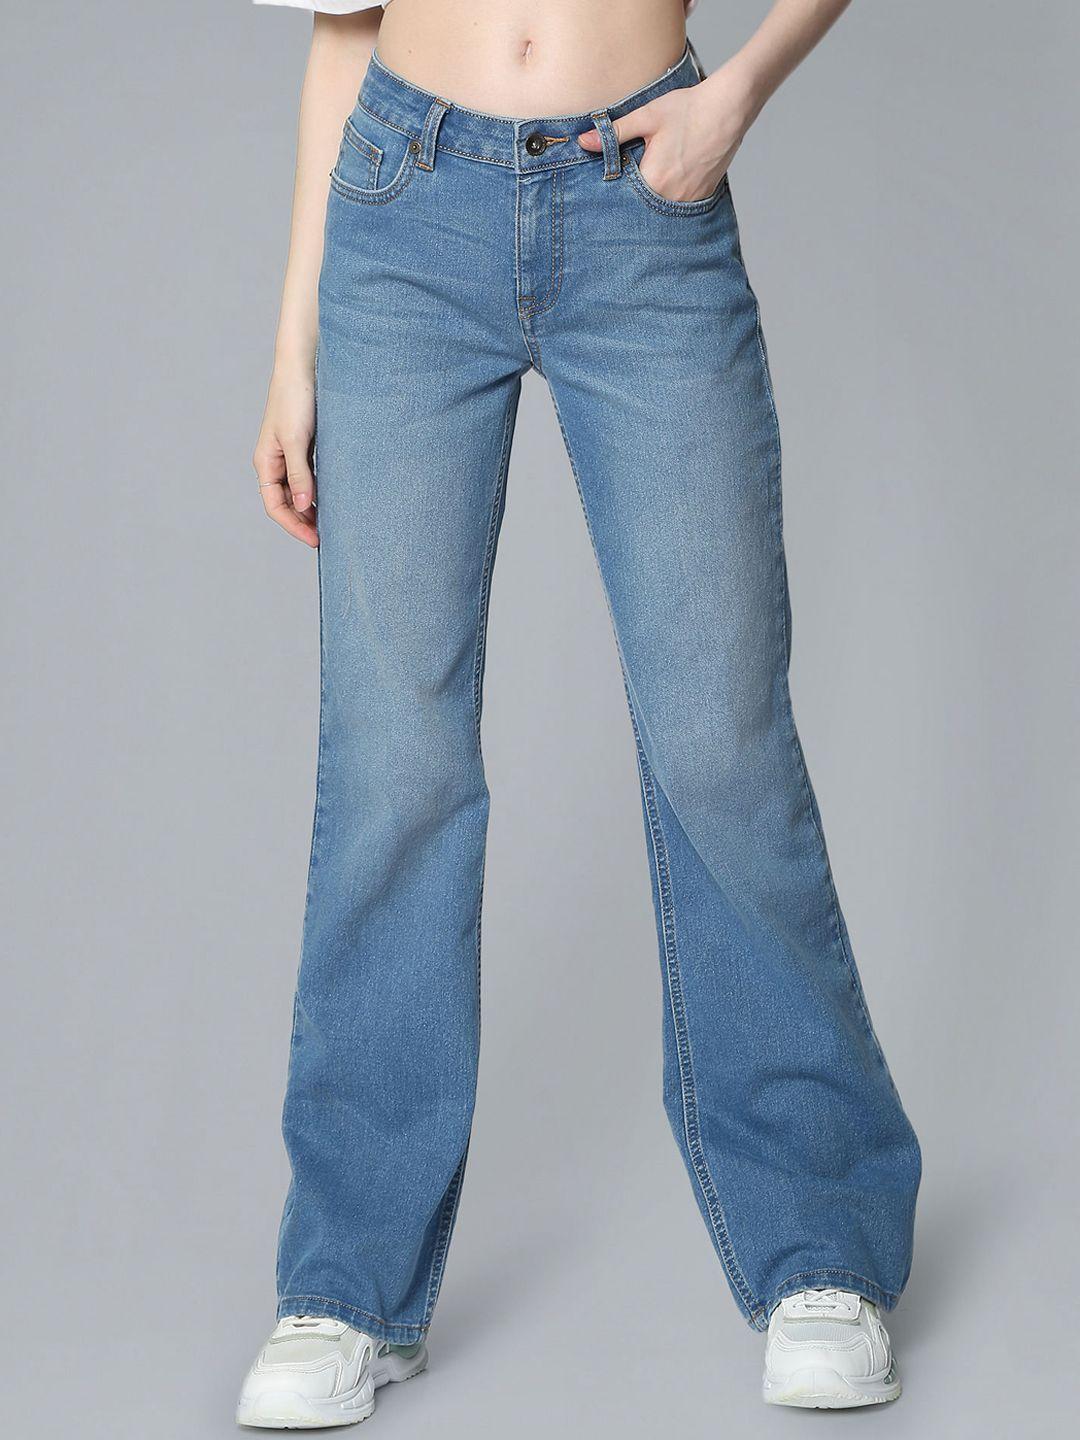 flying-machine-women-bootcut-low-distress-light-fade-stretchable-jeans